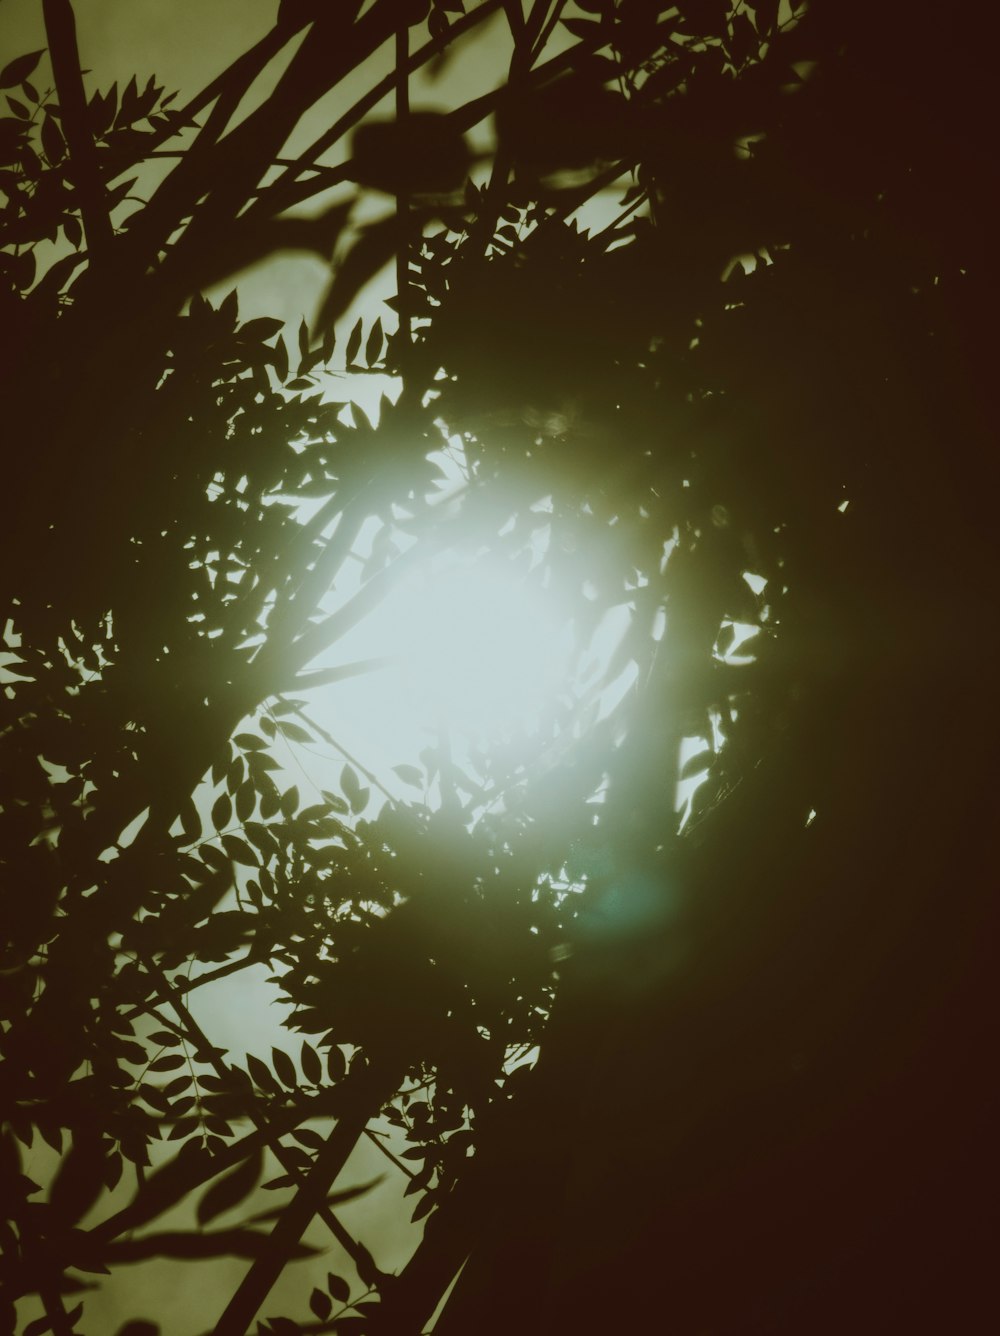 the sun shines through the branches of a tree